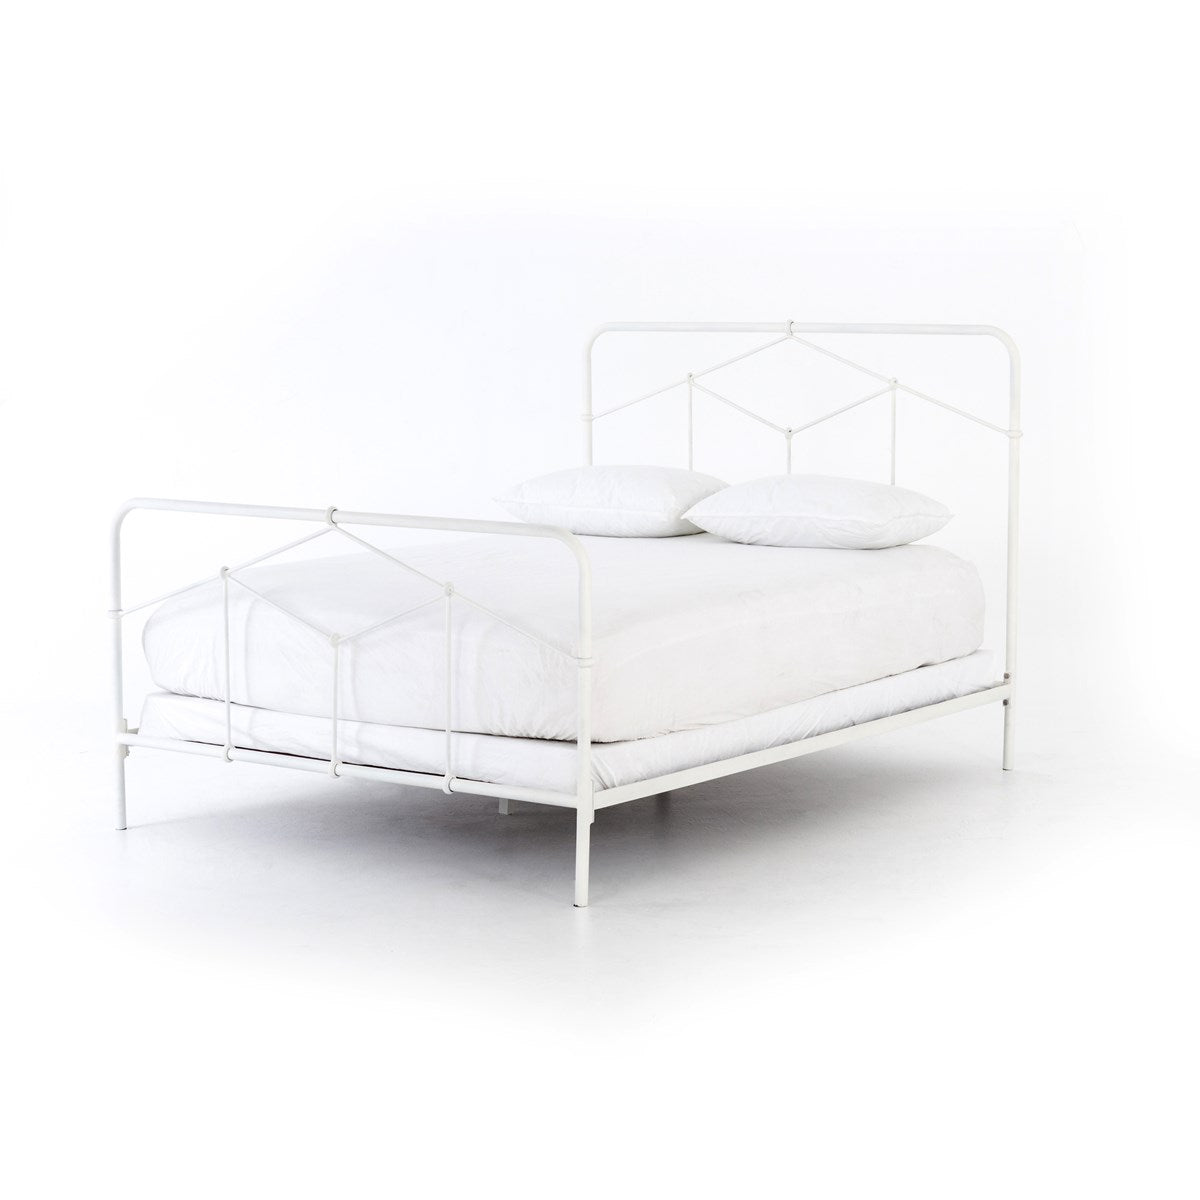 Casey Bed White / KingBed Four Hands  White King  Four Hands, Burke Decor, Mid Century Modern Furniture, Old Bones Furniture Company, Old Bones Co, Modern Mid Century, Designer Furniture, https://www.oldbonesco.com/